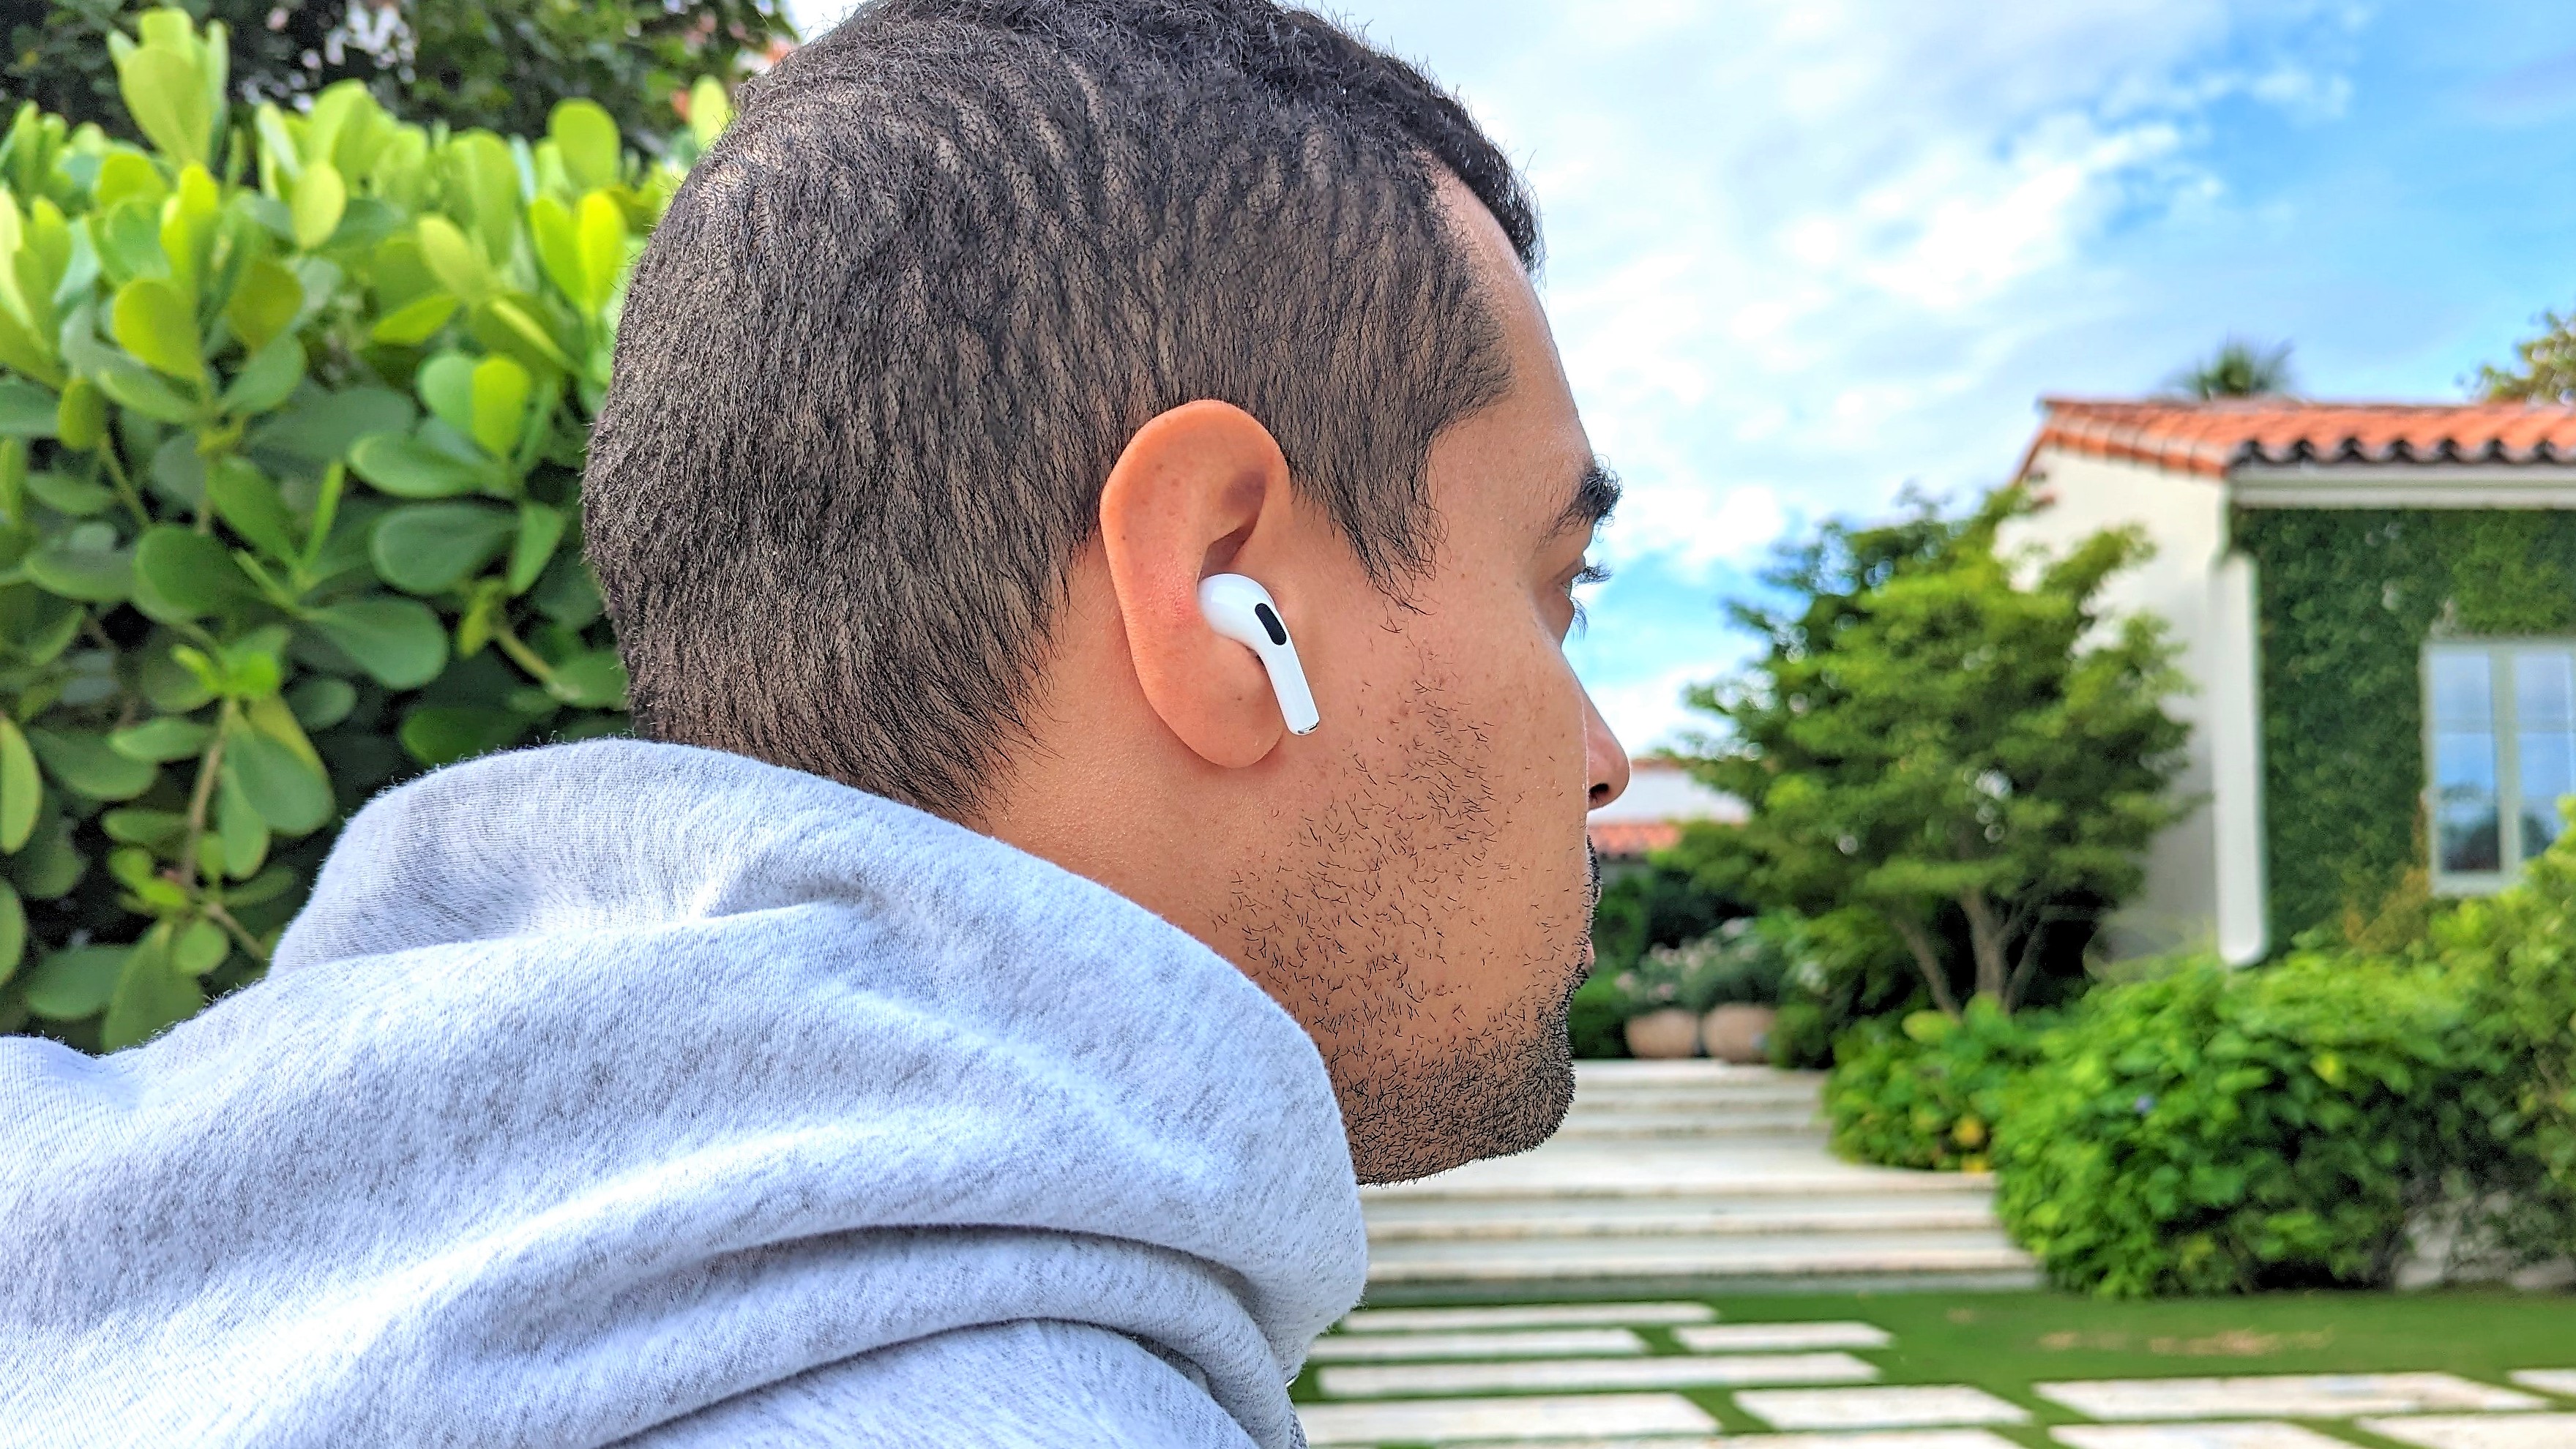 Our reviewer works with AirPods Pro 2